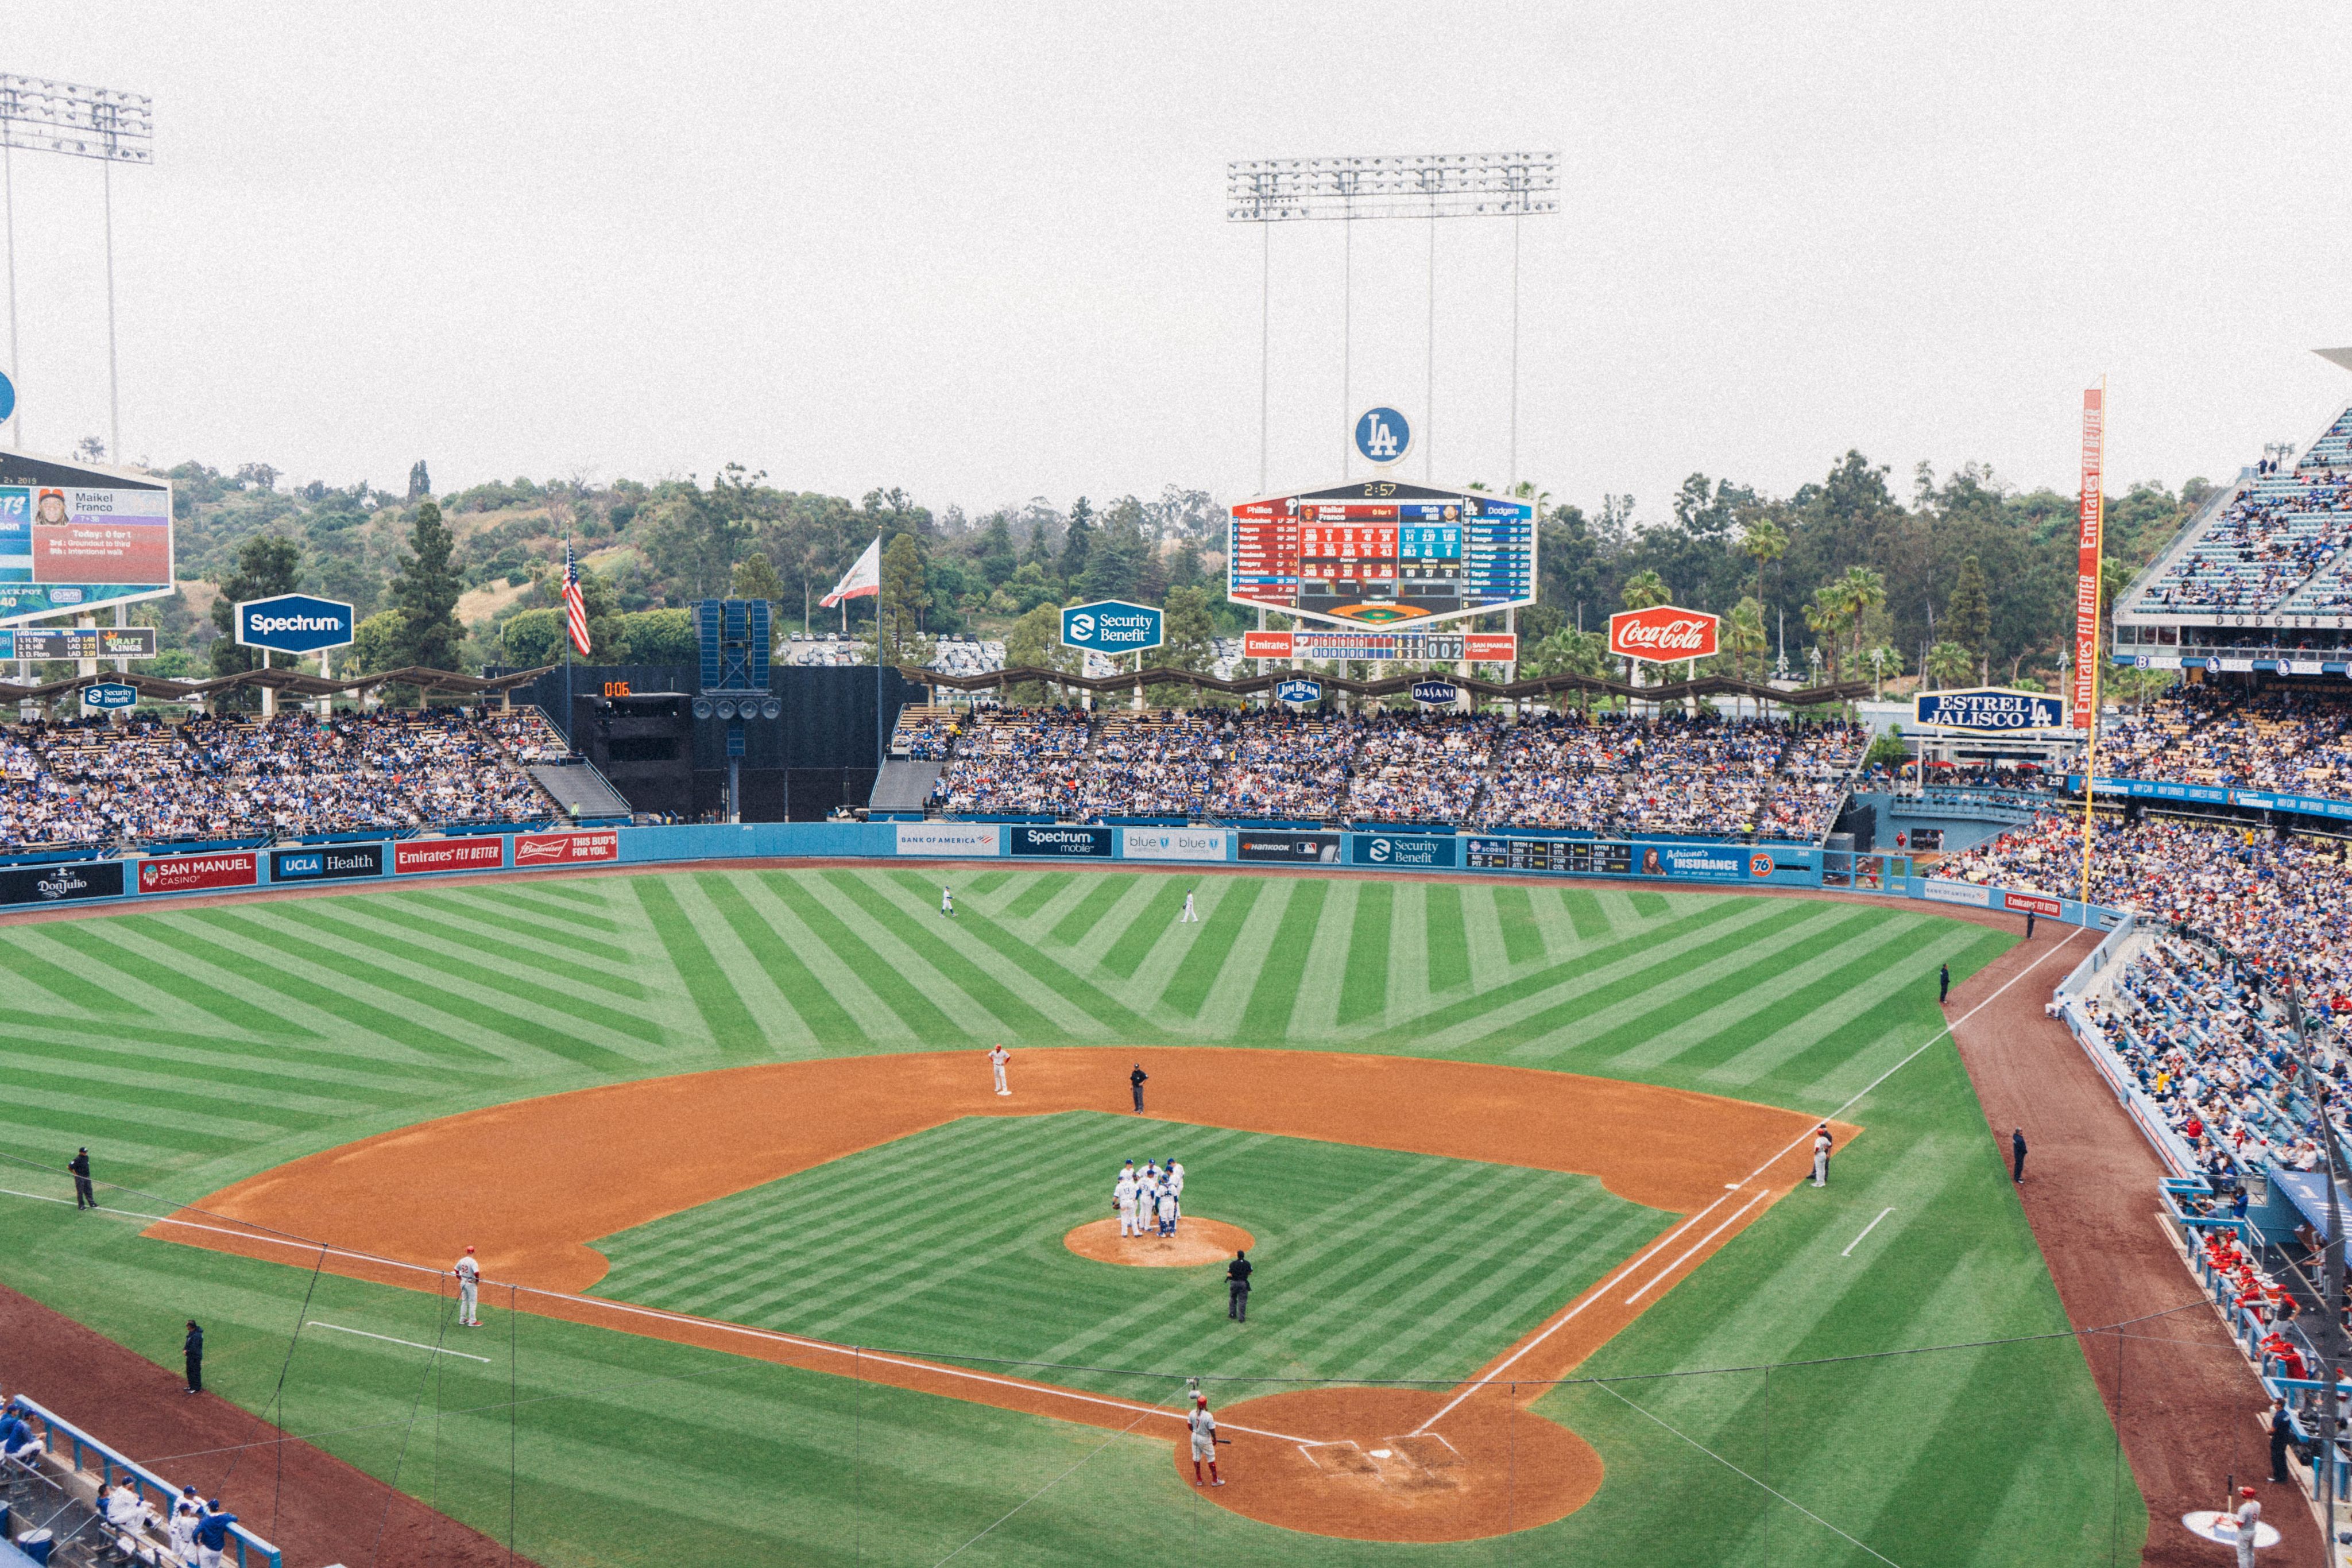 Dodgers Stadium in Los Angeles, CA during an afternoon game. The stands are full of fans while the Dodgers are holding a mound visit.